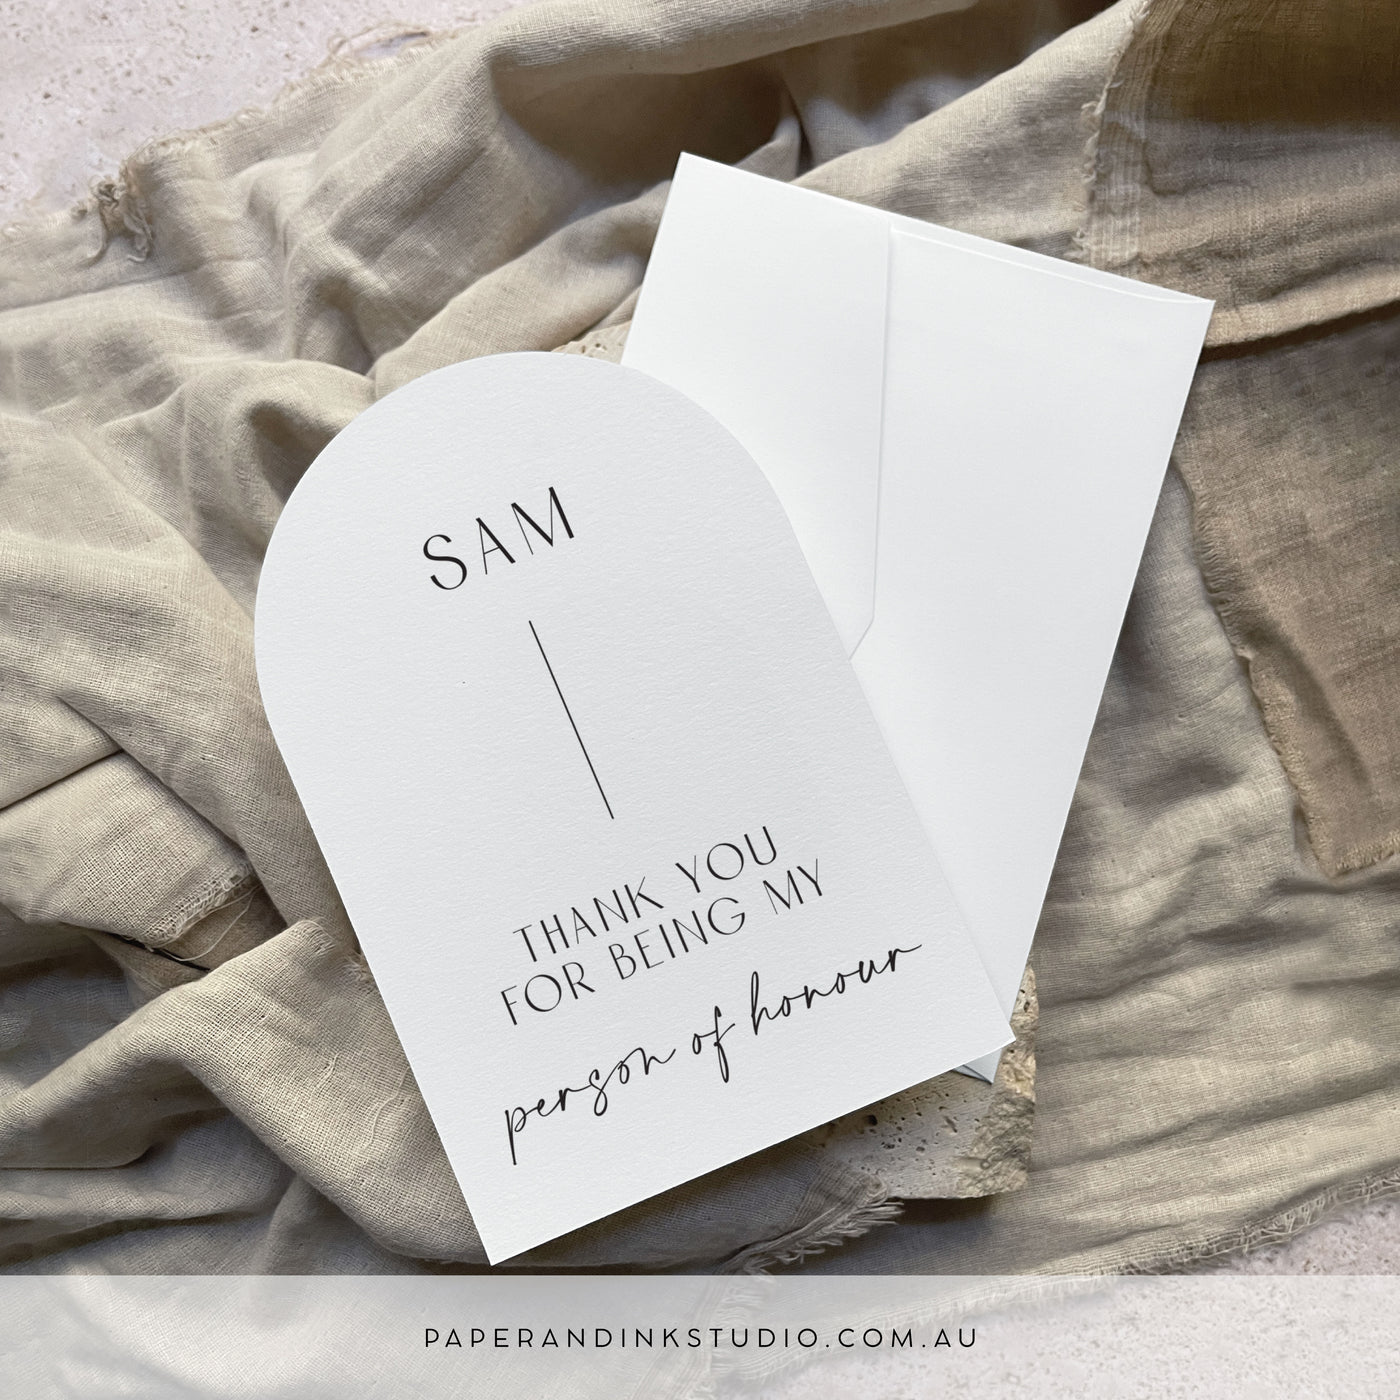 A flat white arch shaped card that can be personalised with the receiver's name, to thank them for being a part of of the couple's wedding party. This one says thank you for being my person of honour and is designed for a non-binary or genderfluid wedding party member.